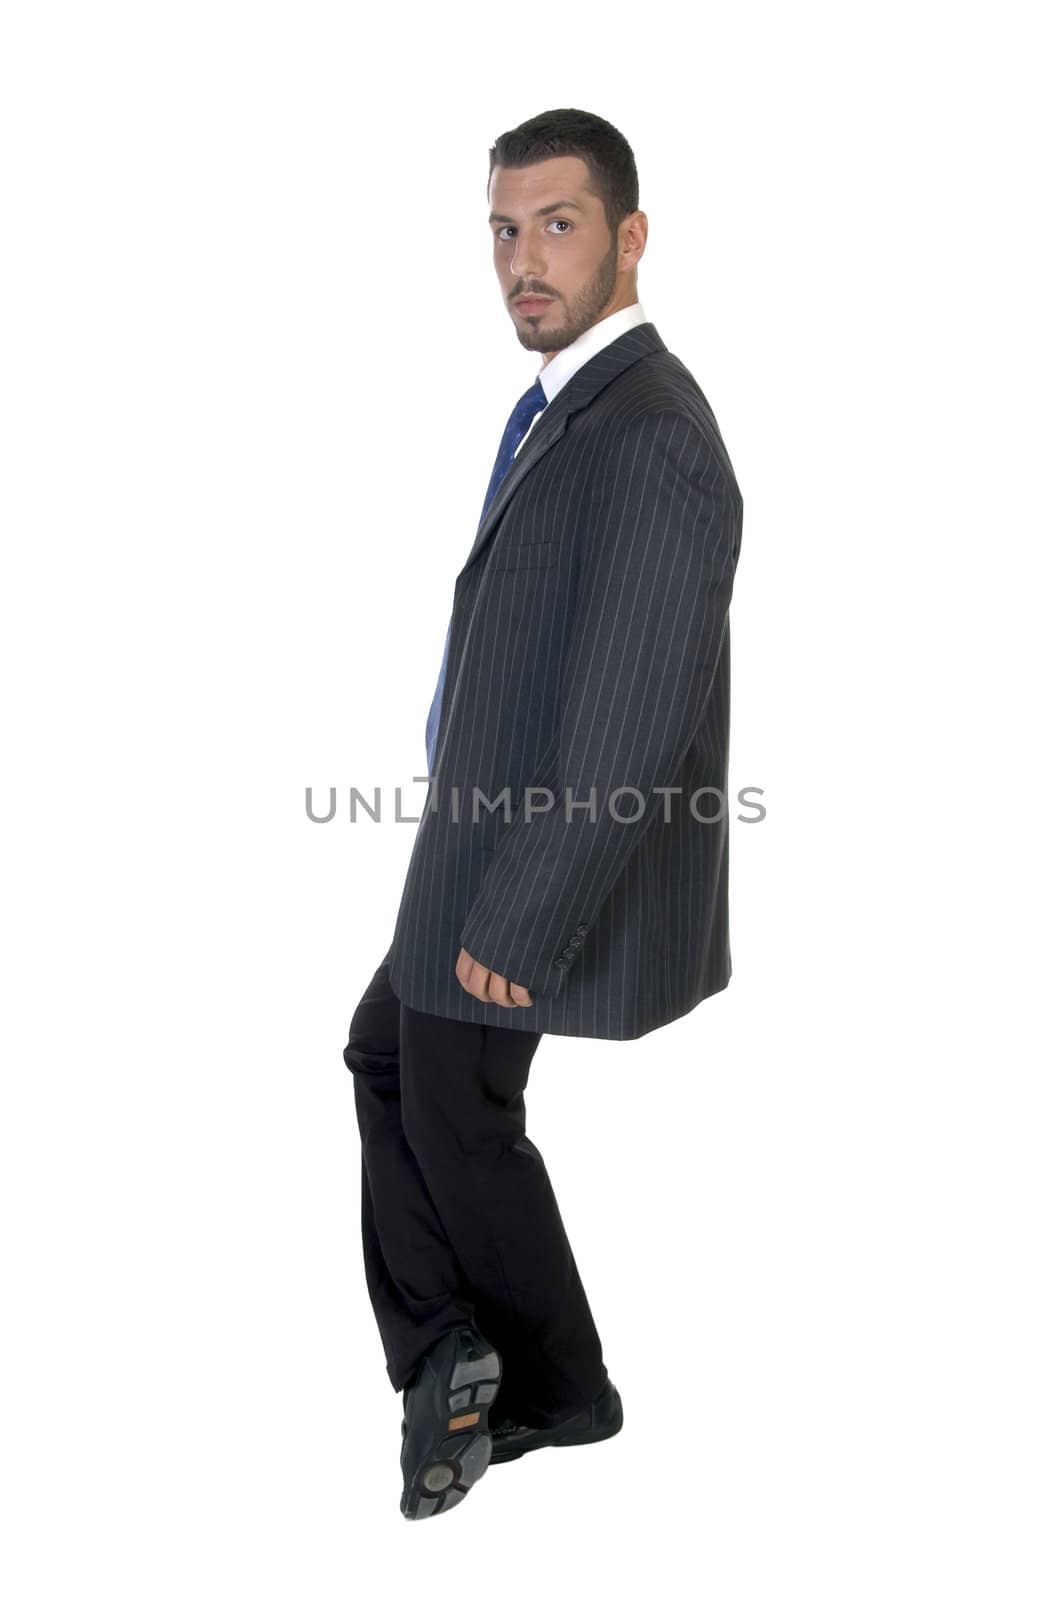 stylish pose of successful businessman on an isolated white background